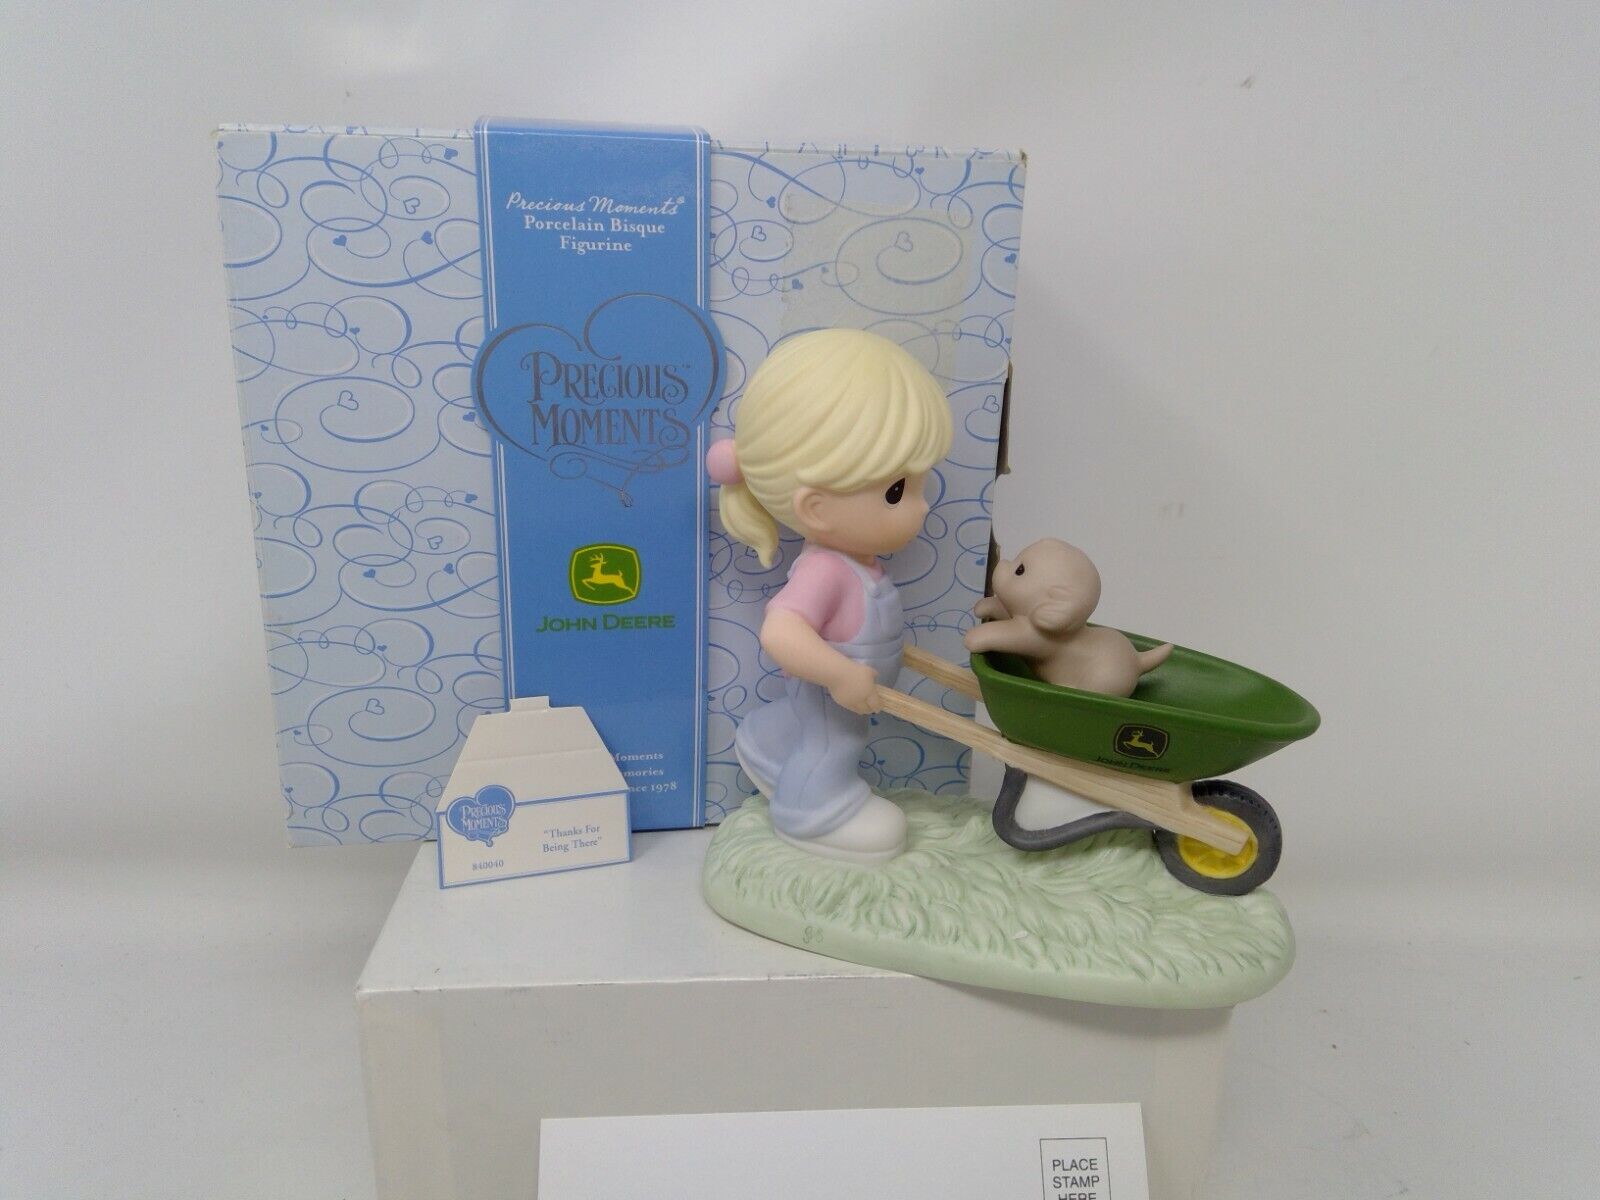 Precious Moments 840040 Thanks For Being There - John Deere Figurine